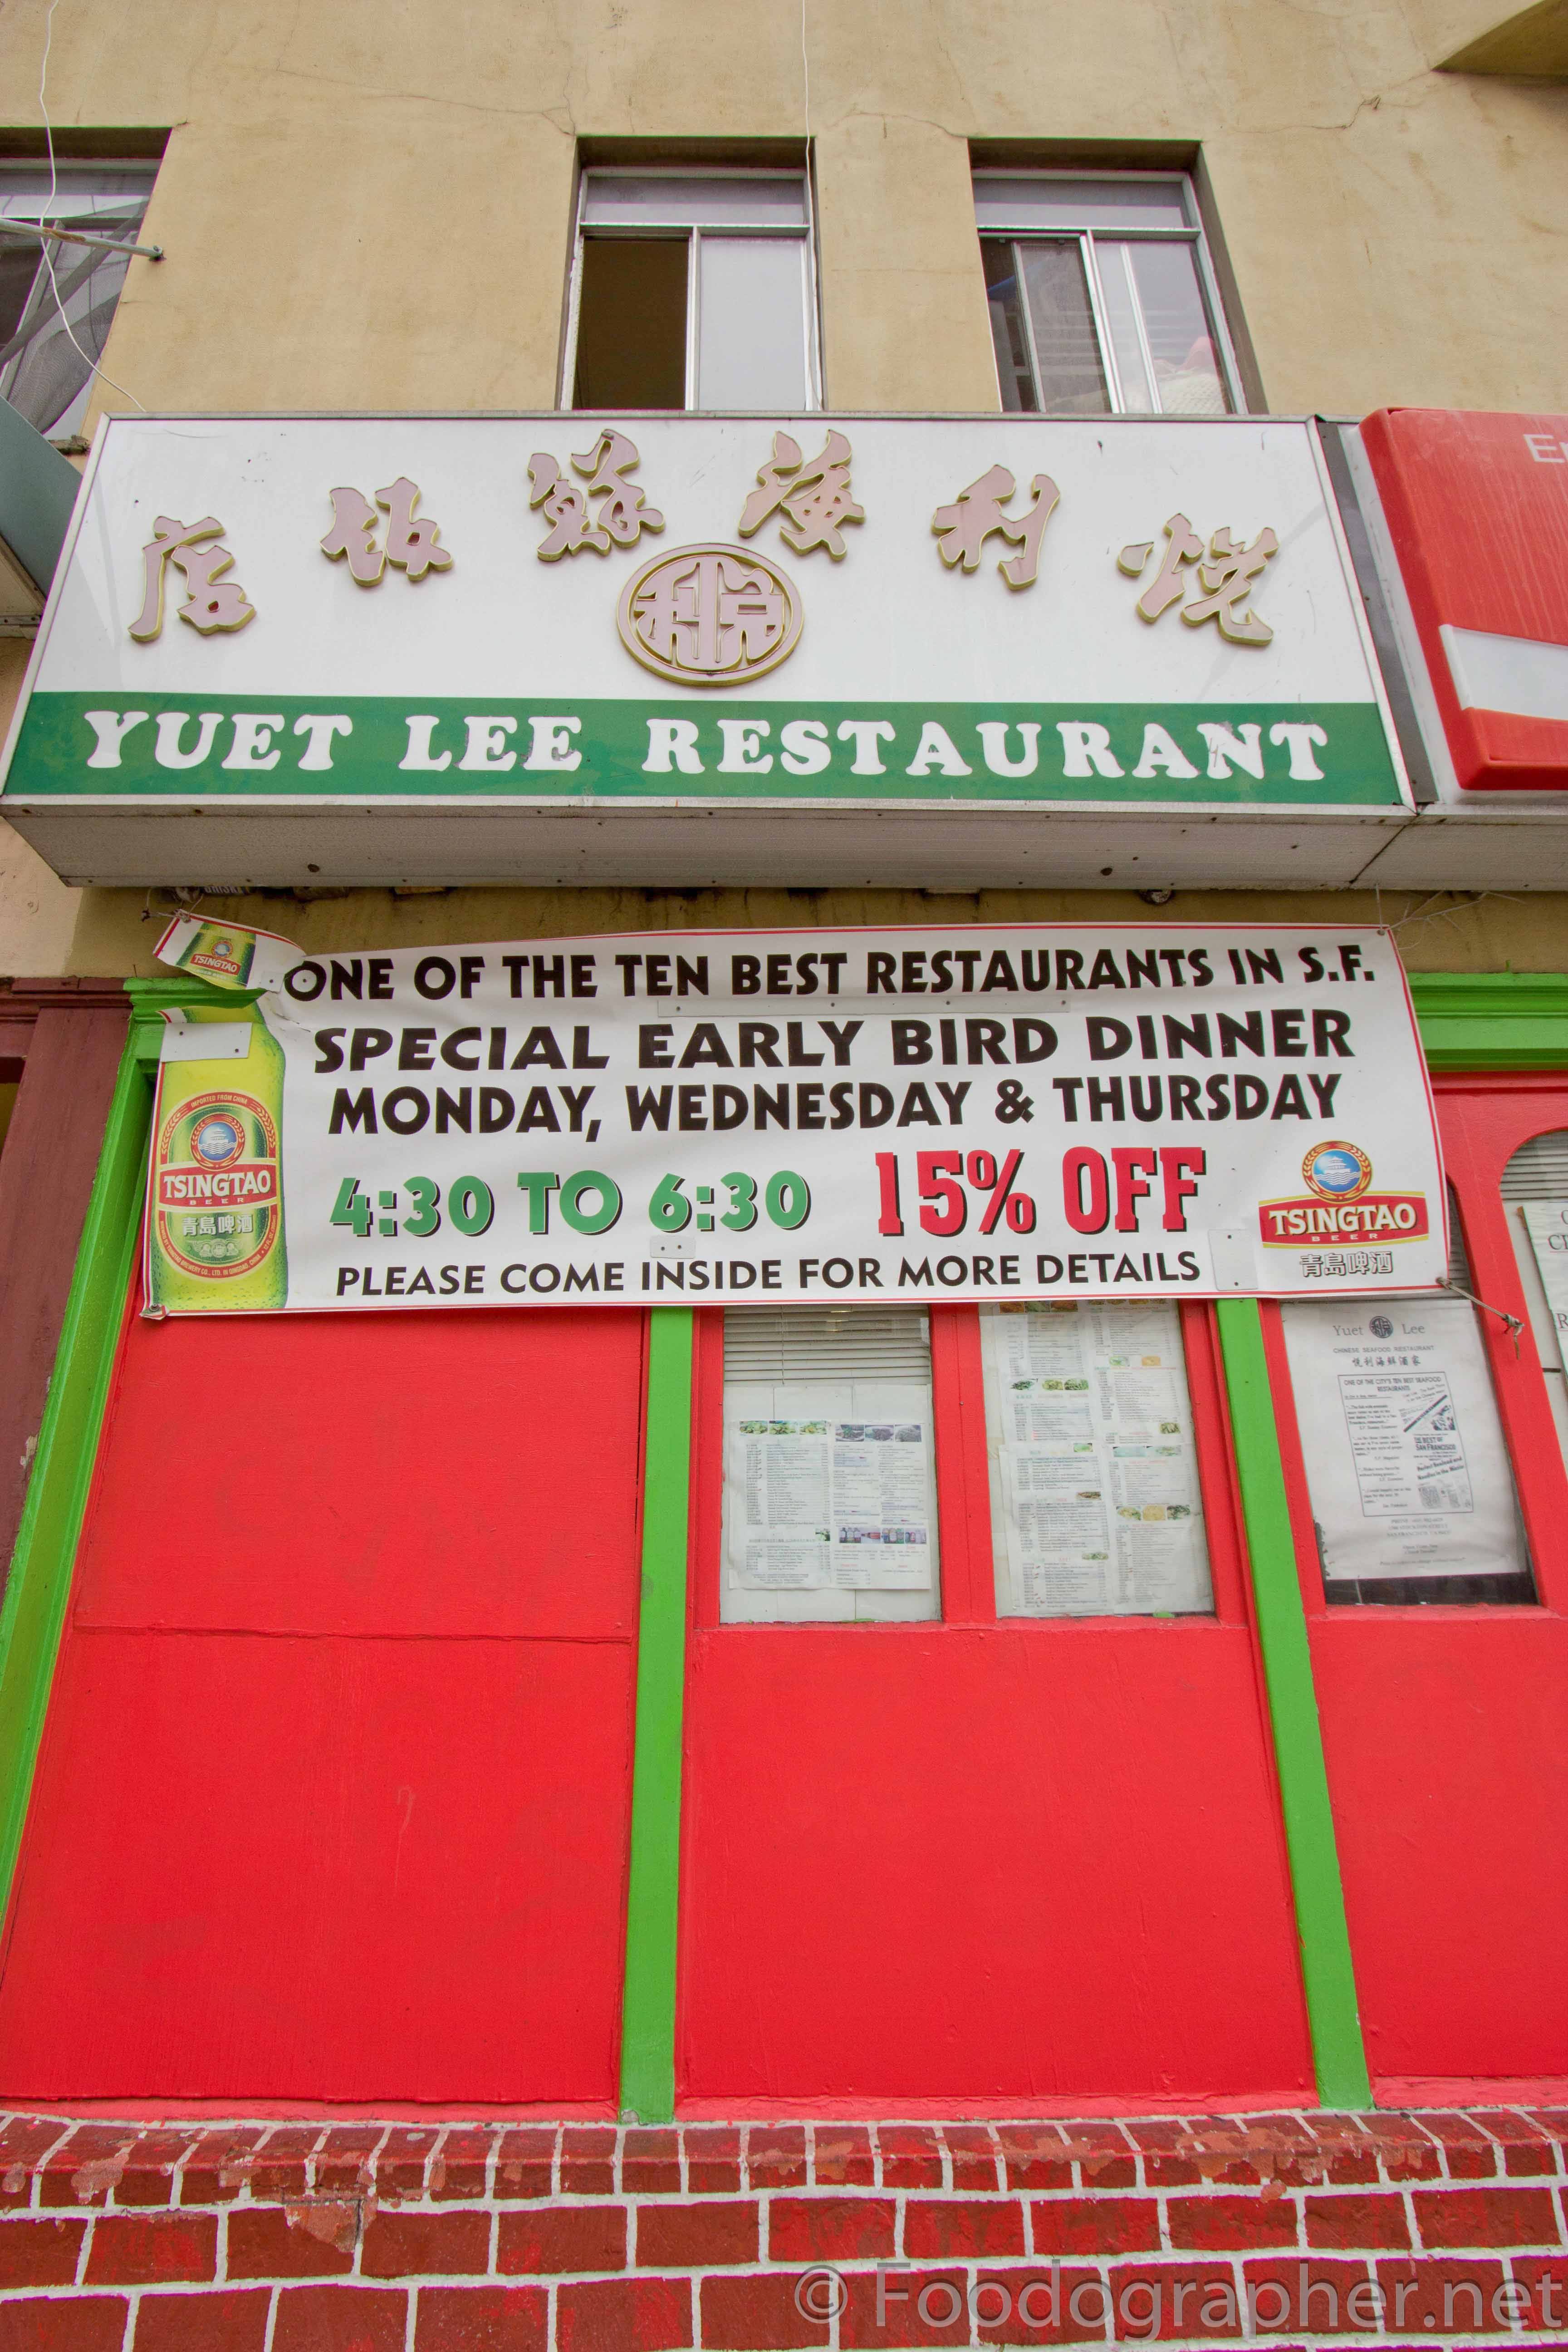 Yuet Lee in San Francisco, CA | The Foodographer